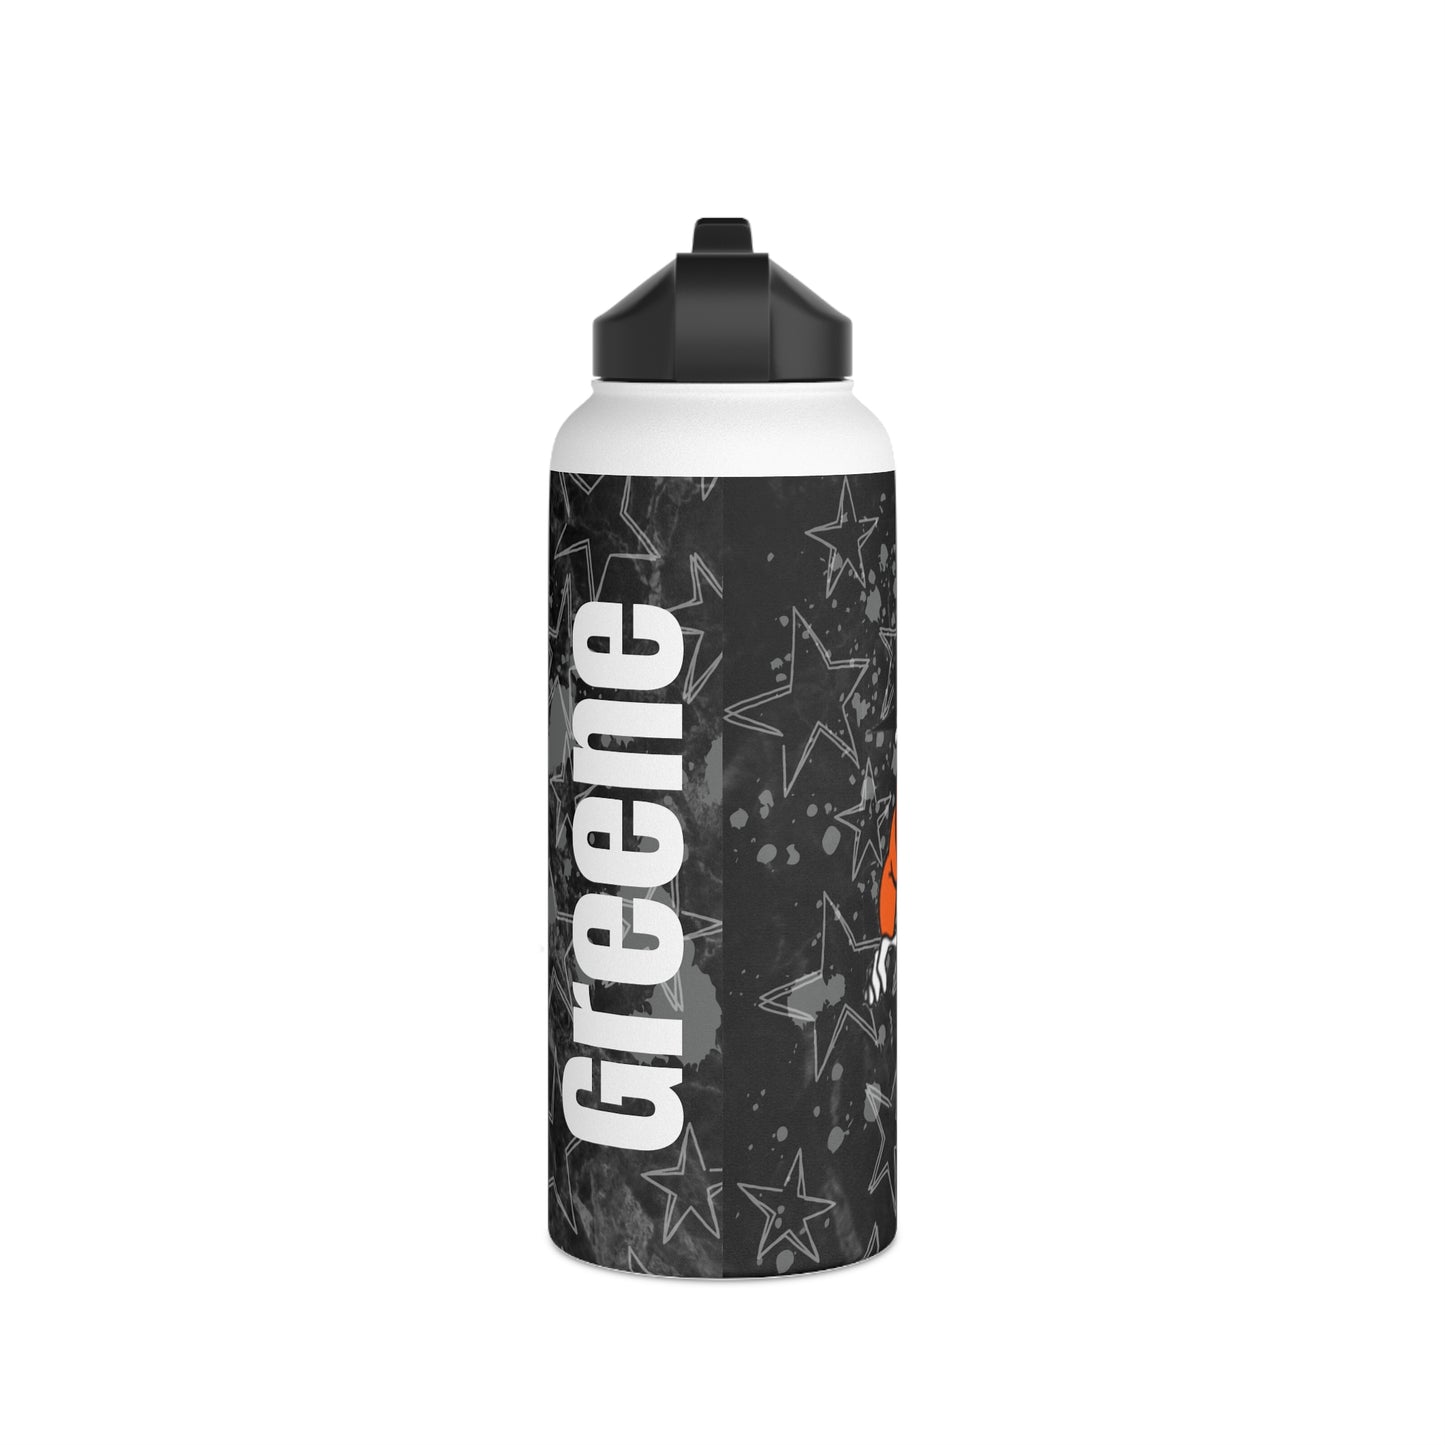 Chester Yellow Jackets Stainless Steel Water Bottle